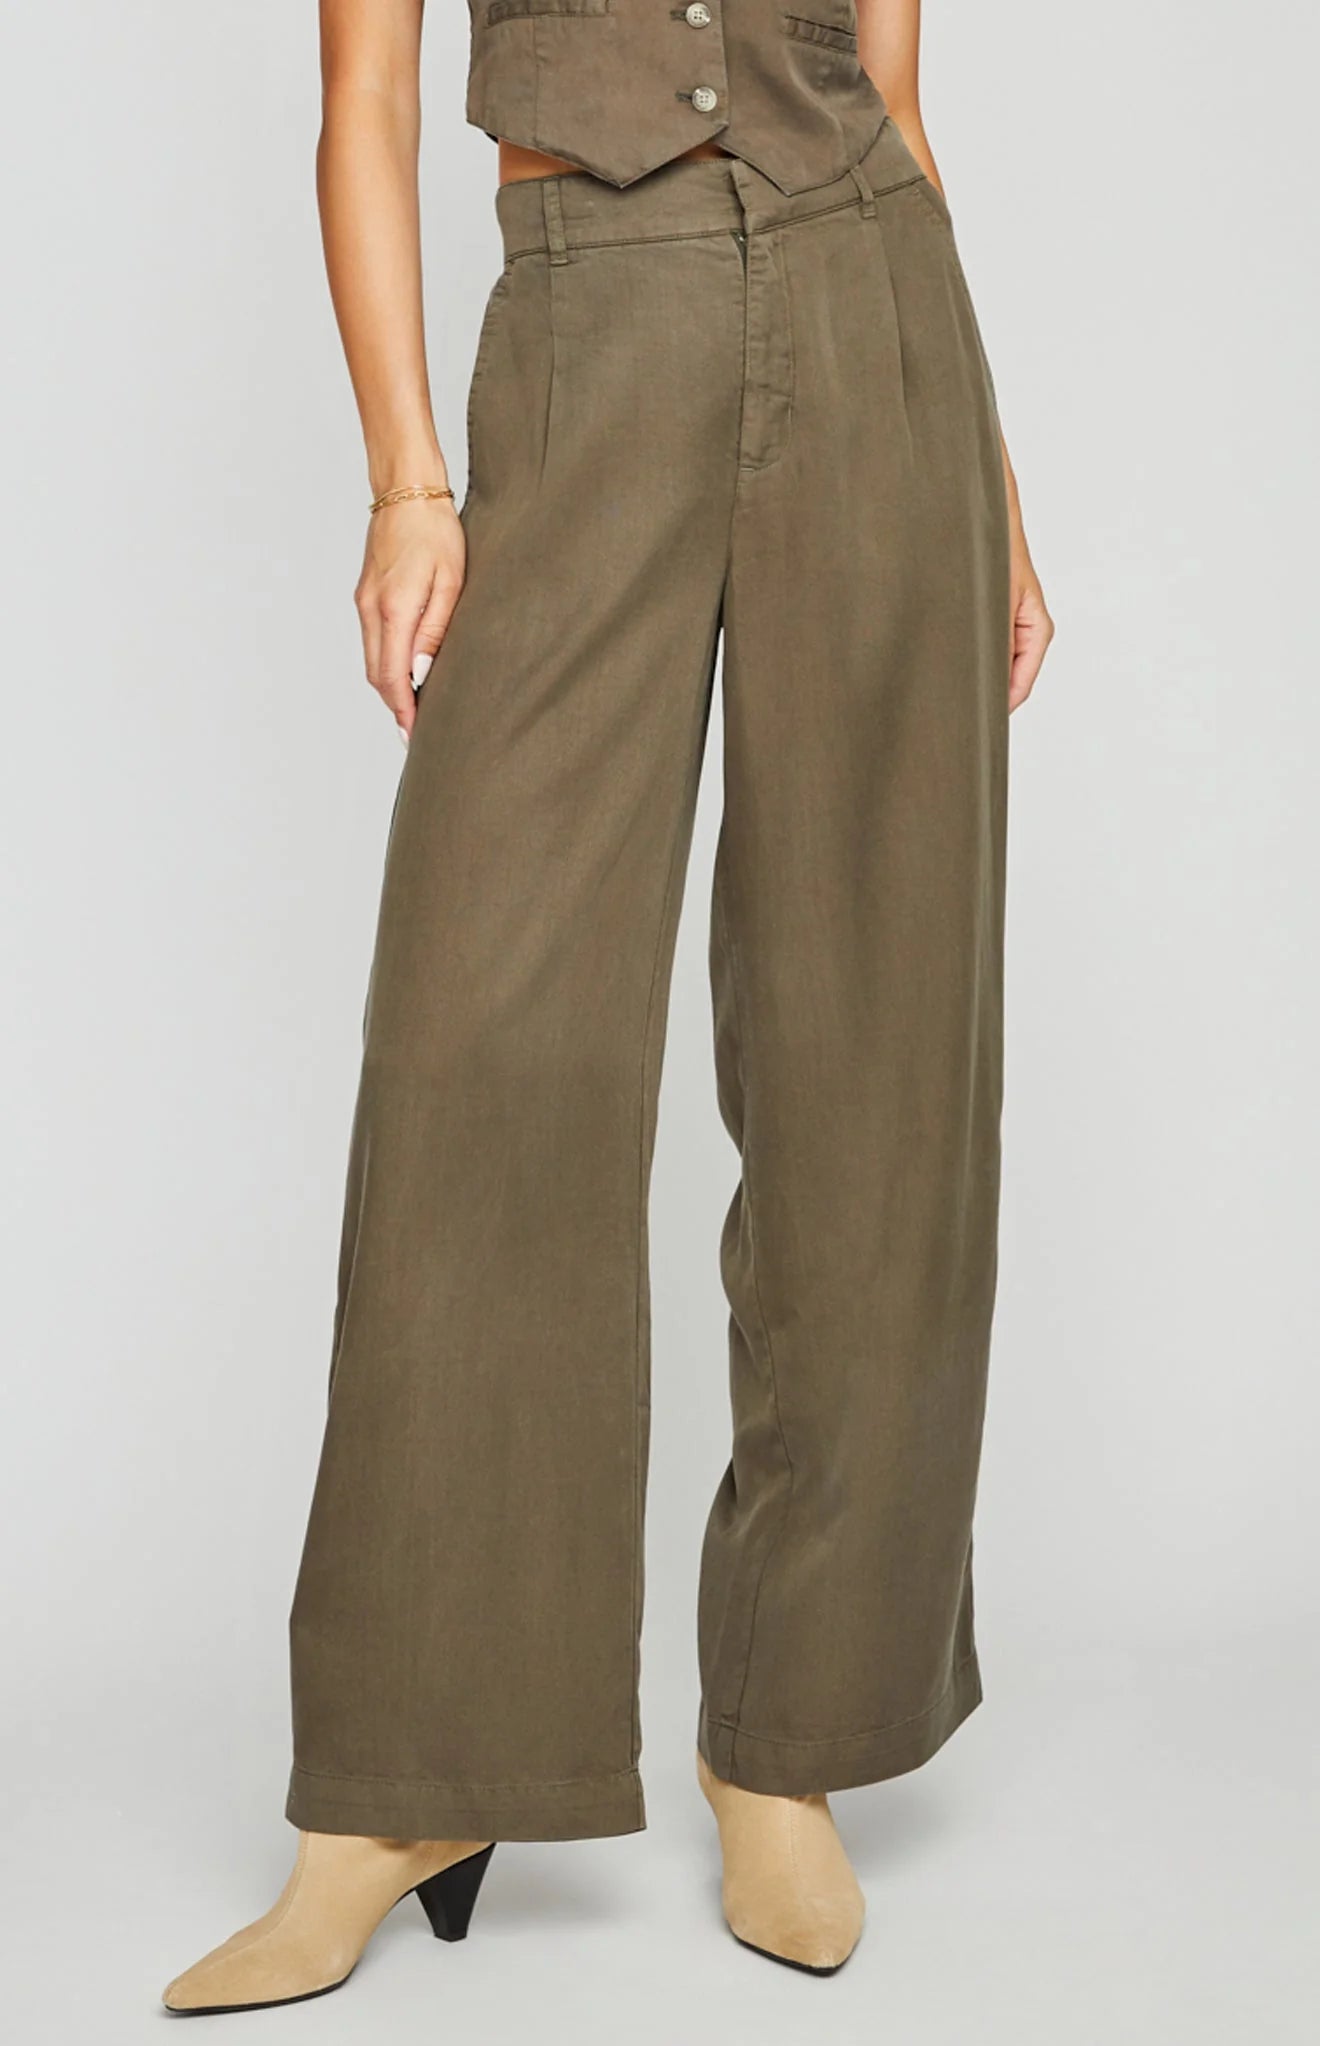 The Sabine Pant from Gentle Fawn is made of tencel twill that has been garment dyed to achieve a dimensional look and soft feel. The classic wide leg trouser is a wardrobe essential that you can easily dress up or down. For a great look pair it with a matching Carmen Vest.